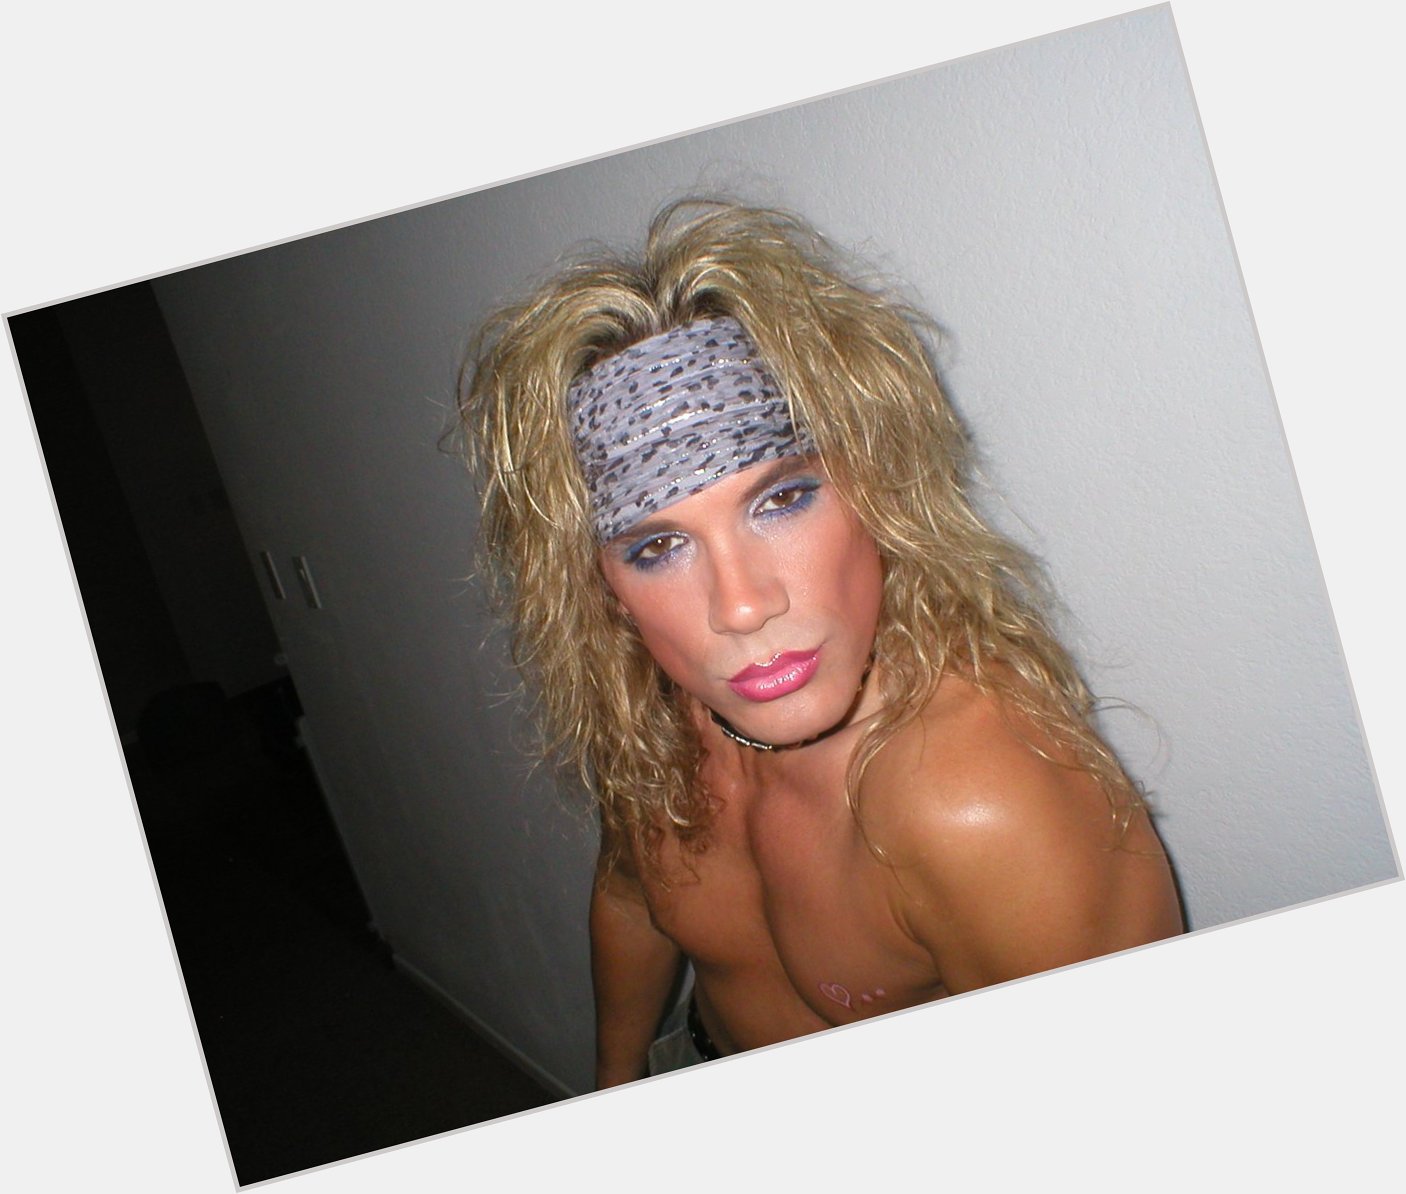 Happy birthday vince neil this isn\t a picture of you but you sure wish you looked this good! 